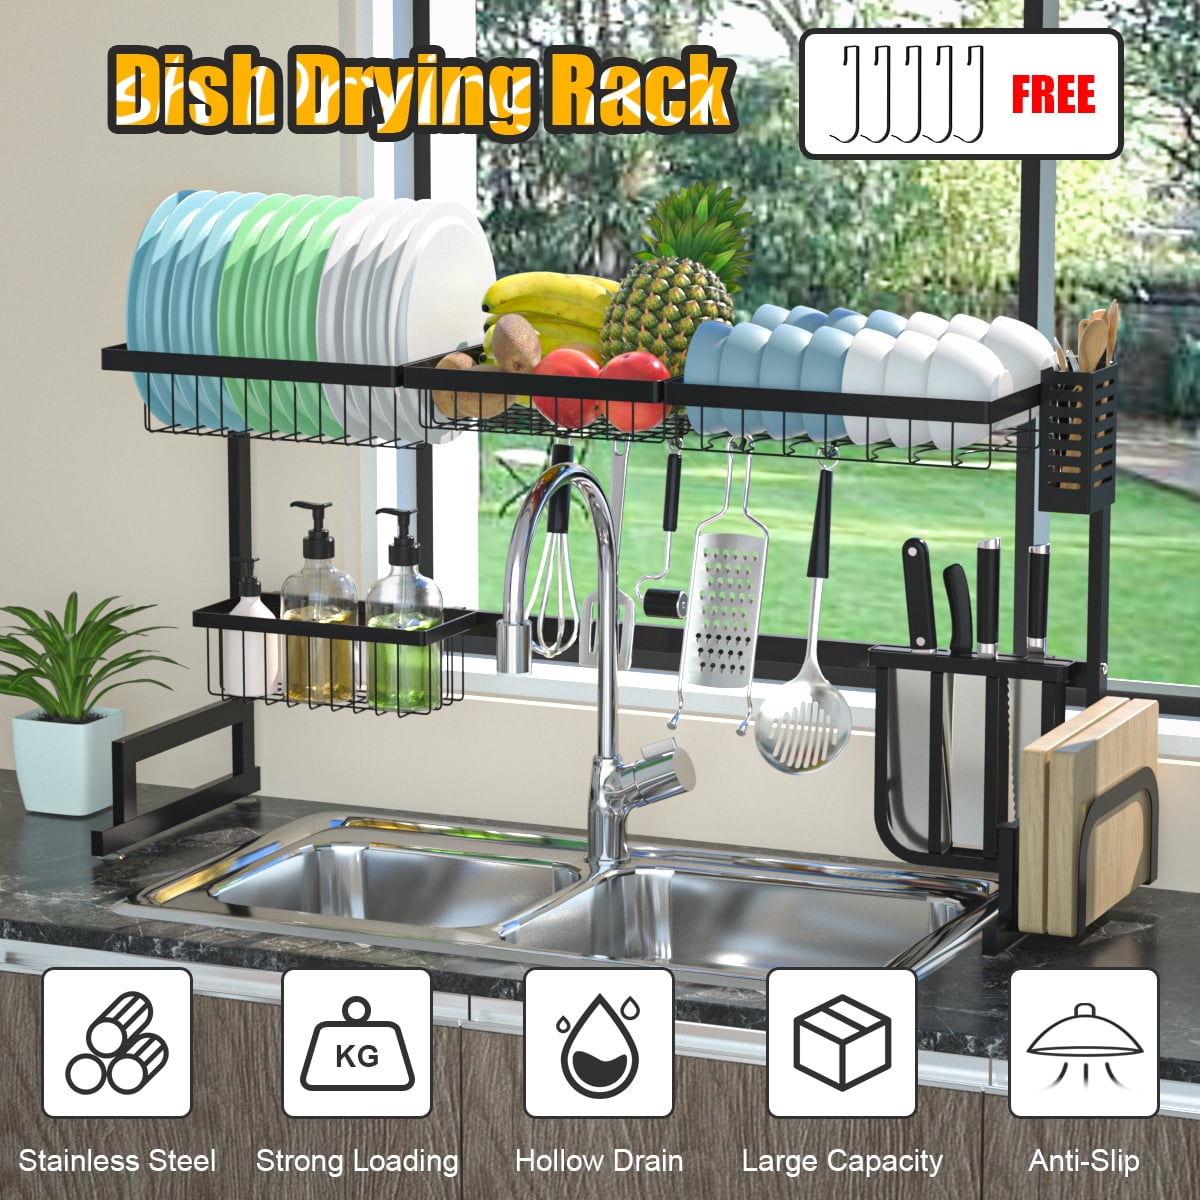 Dish Drying Rack, Zrsdixki Dish Rack Drain Set with Utensil Cups Holders for Kitchen Counter, Cutting Board Holder, Stainless Steel Kitchen Dishes